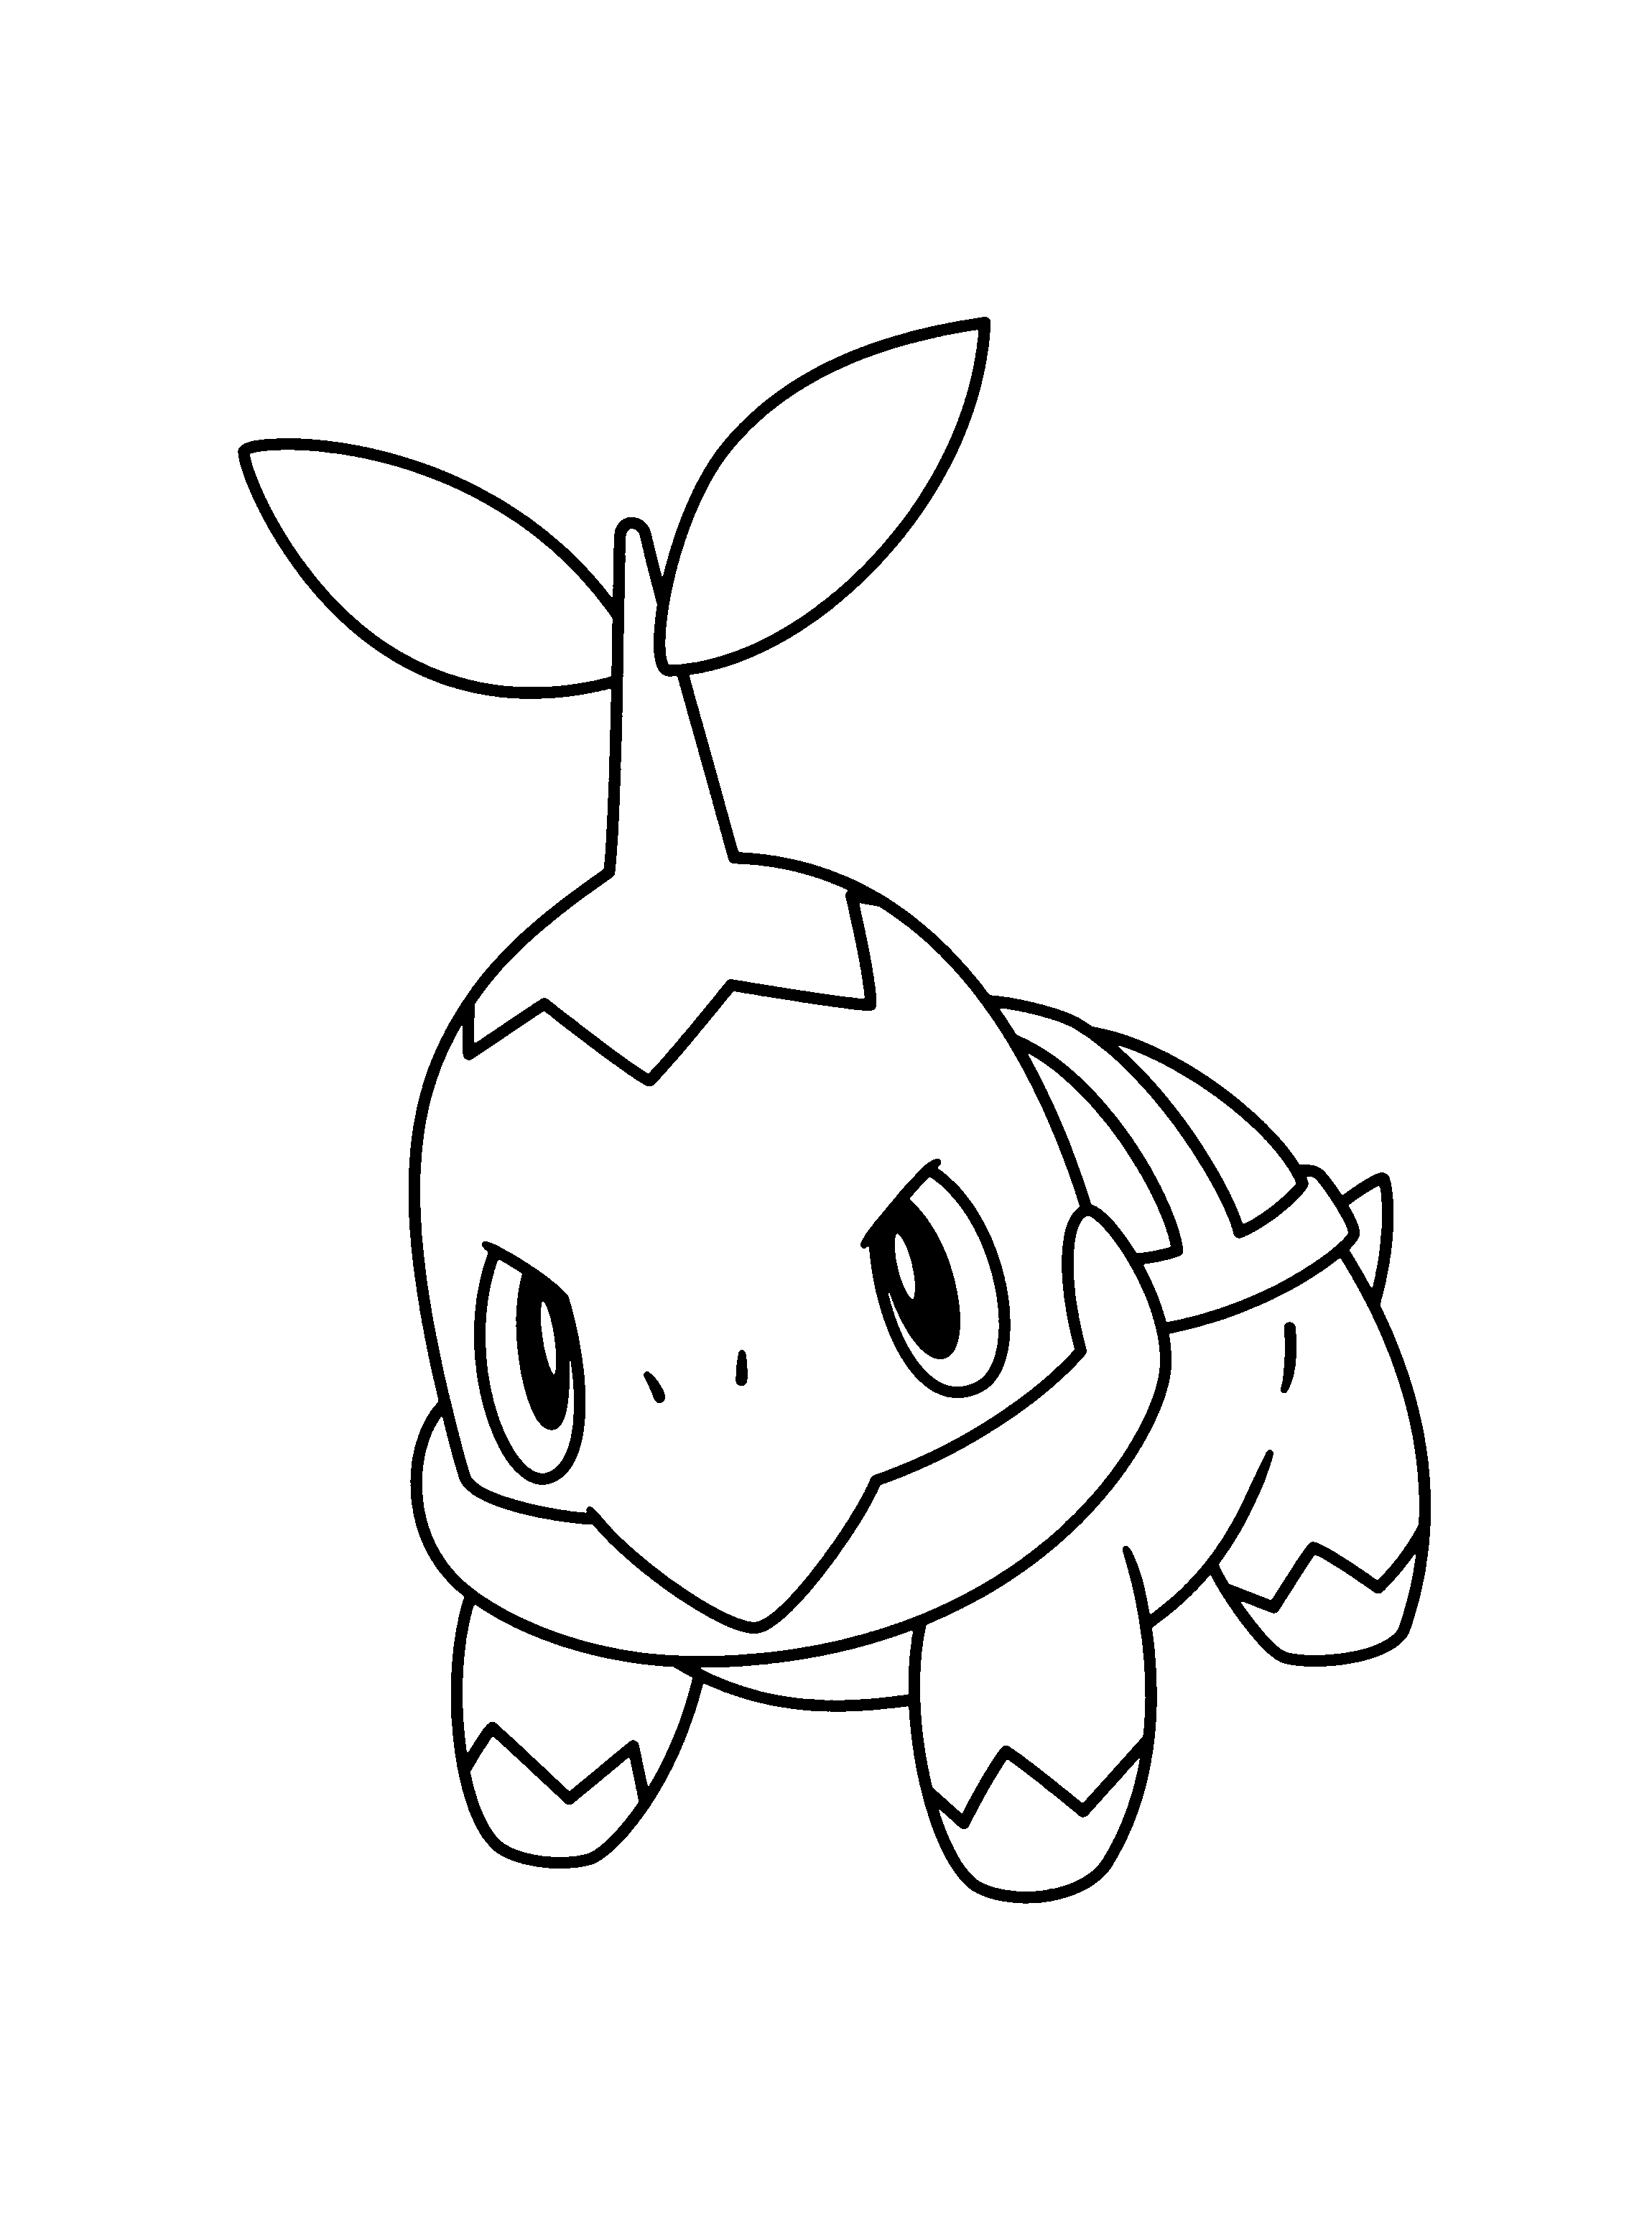 Clip Arts Related To : pokemon turtwig coloring pages. view all Pokemon Tur...